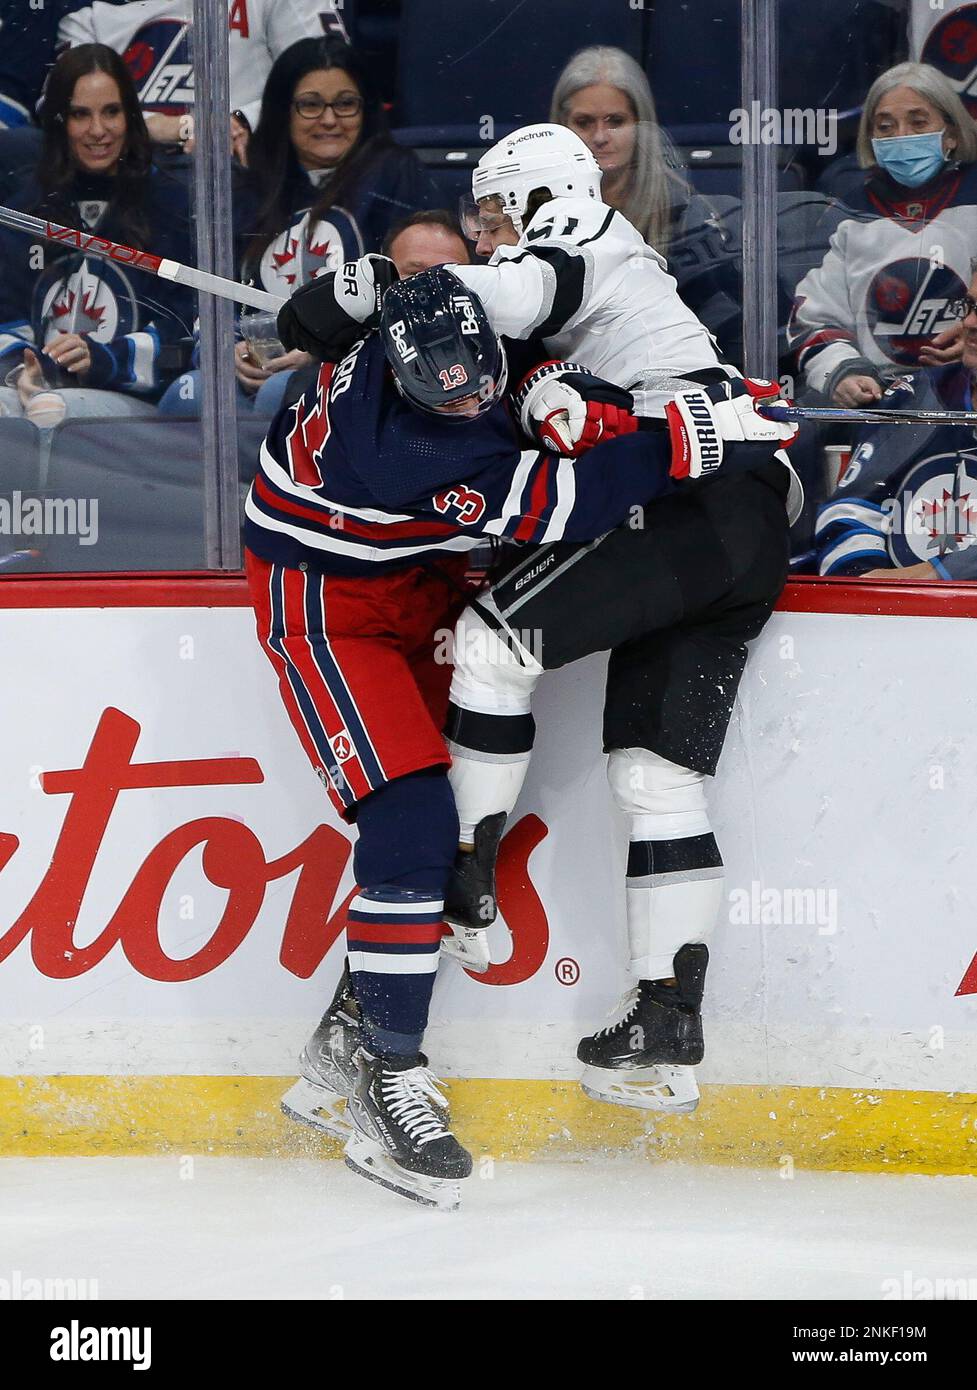 Winnipeg Jets' Zach Sanford (13) and Los Angeles Kings' Troy Stecher (51)  collide during the second period of an NHL hockey game Saturday, April 2,  2022, in Winnipeg, Manitoba. (John Woods/The Canadian